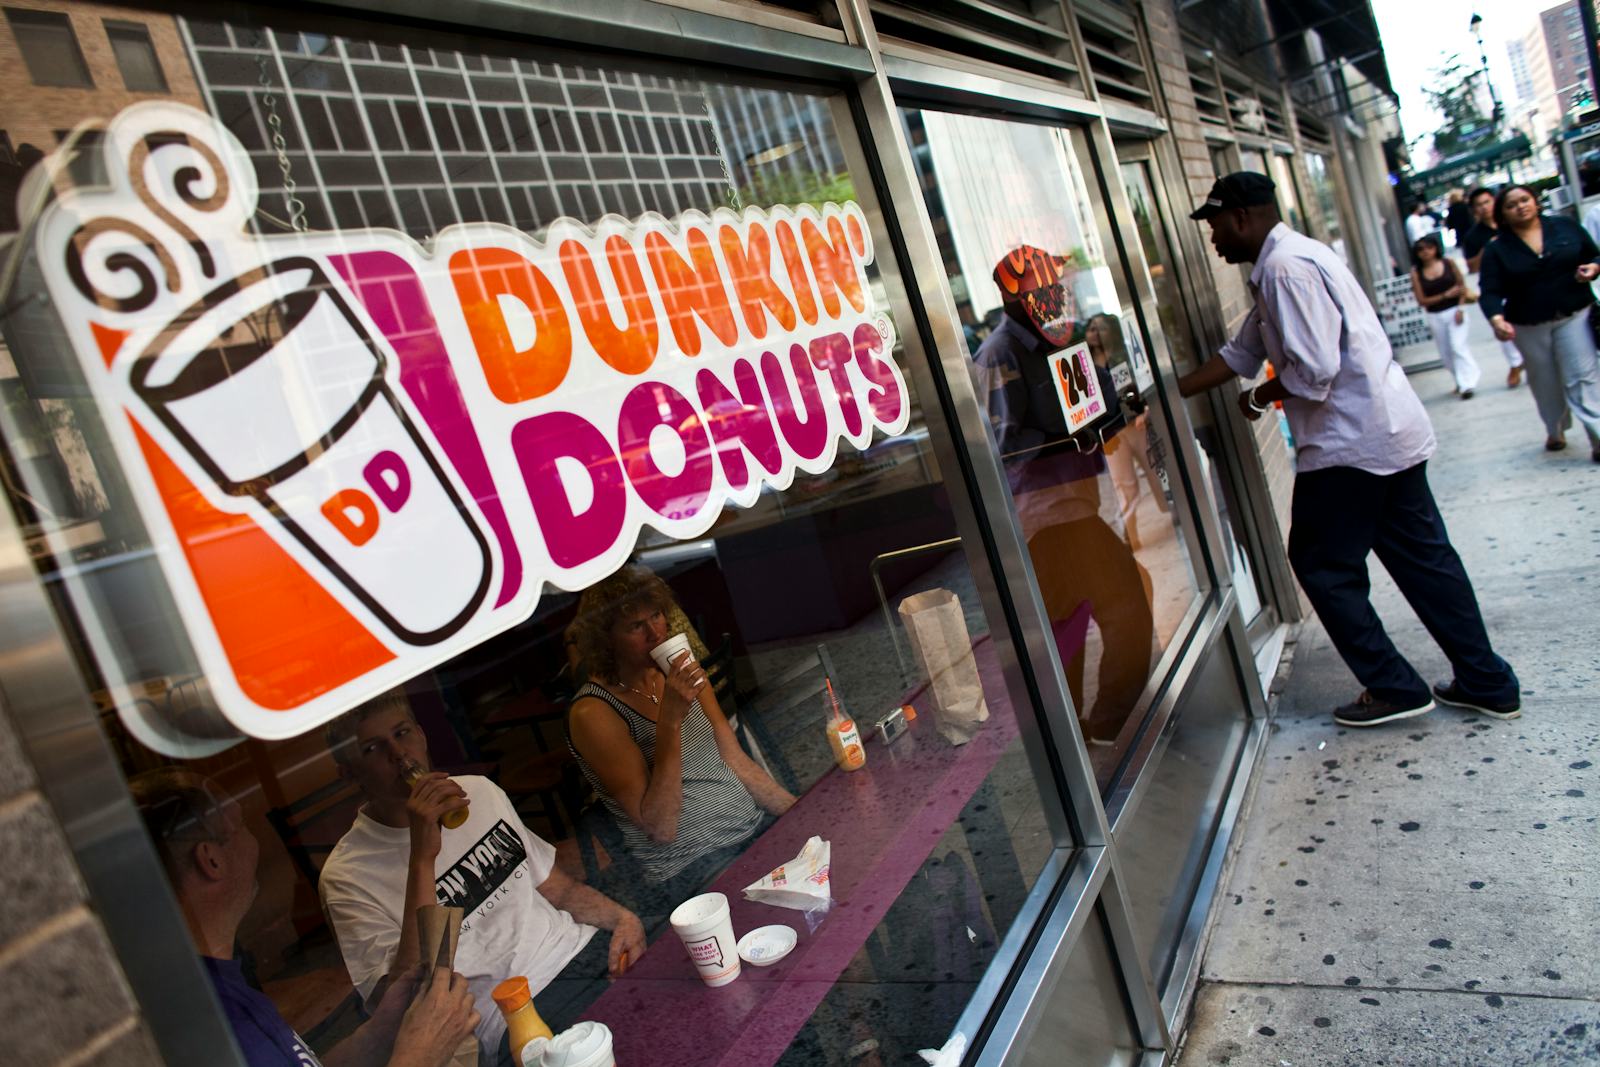 Dunkin' Donuts May Change Its Name To Just "Dunkin'," According To Sign